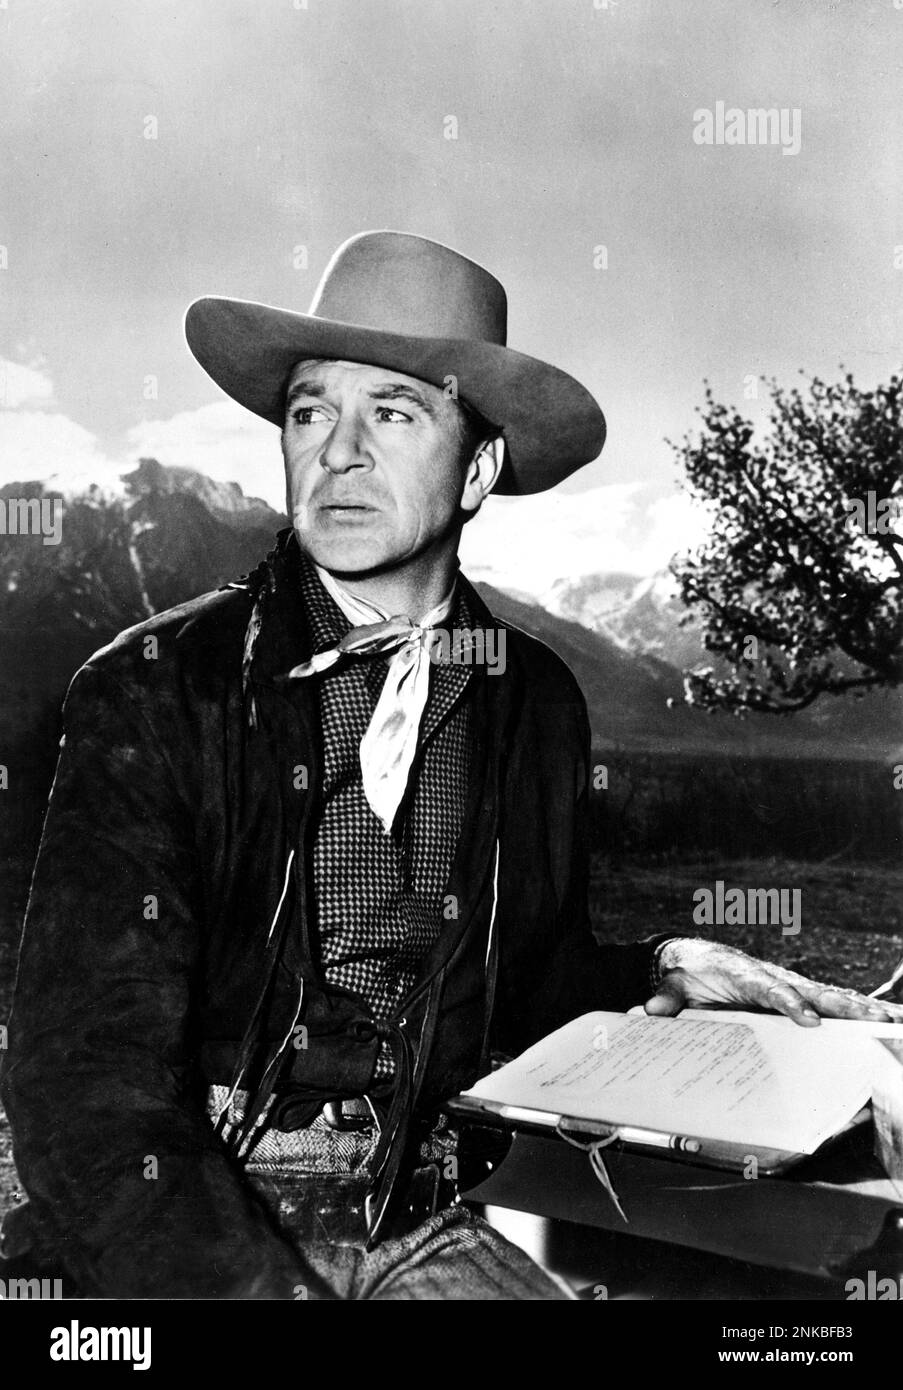 1953 : The movie actor GARY COOPER ( Helena , Montana 7 may 1901 - Beverly Hills , California 13 may 1961 )   in  BLOWING WILD  by Hugo Fregonese  - CINEMA - portrait - ritratto - WESTERN - hat - cappello - foulard - bandanna - copione cinematografico  - script   ----  Archivio GBB Stock Photo